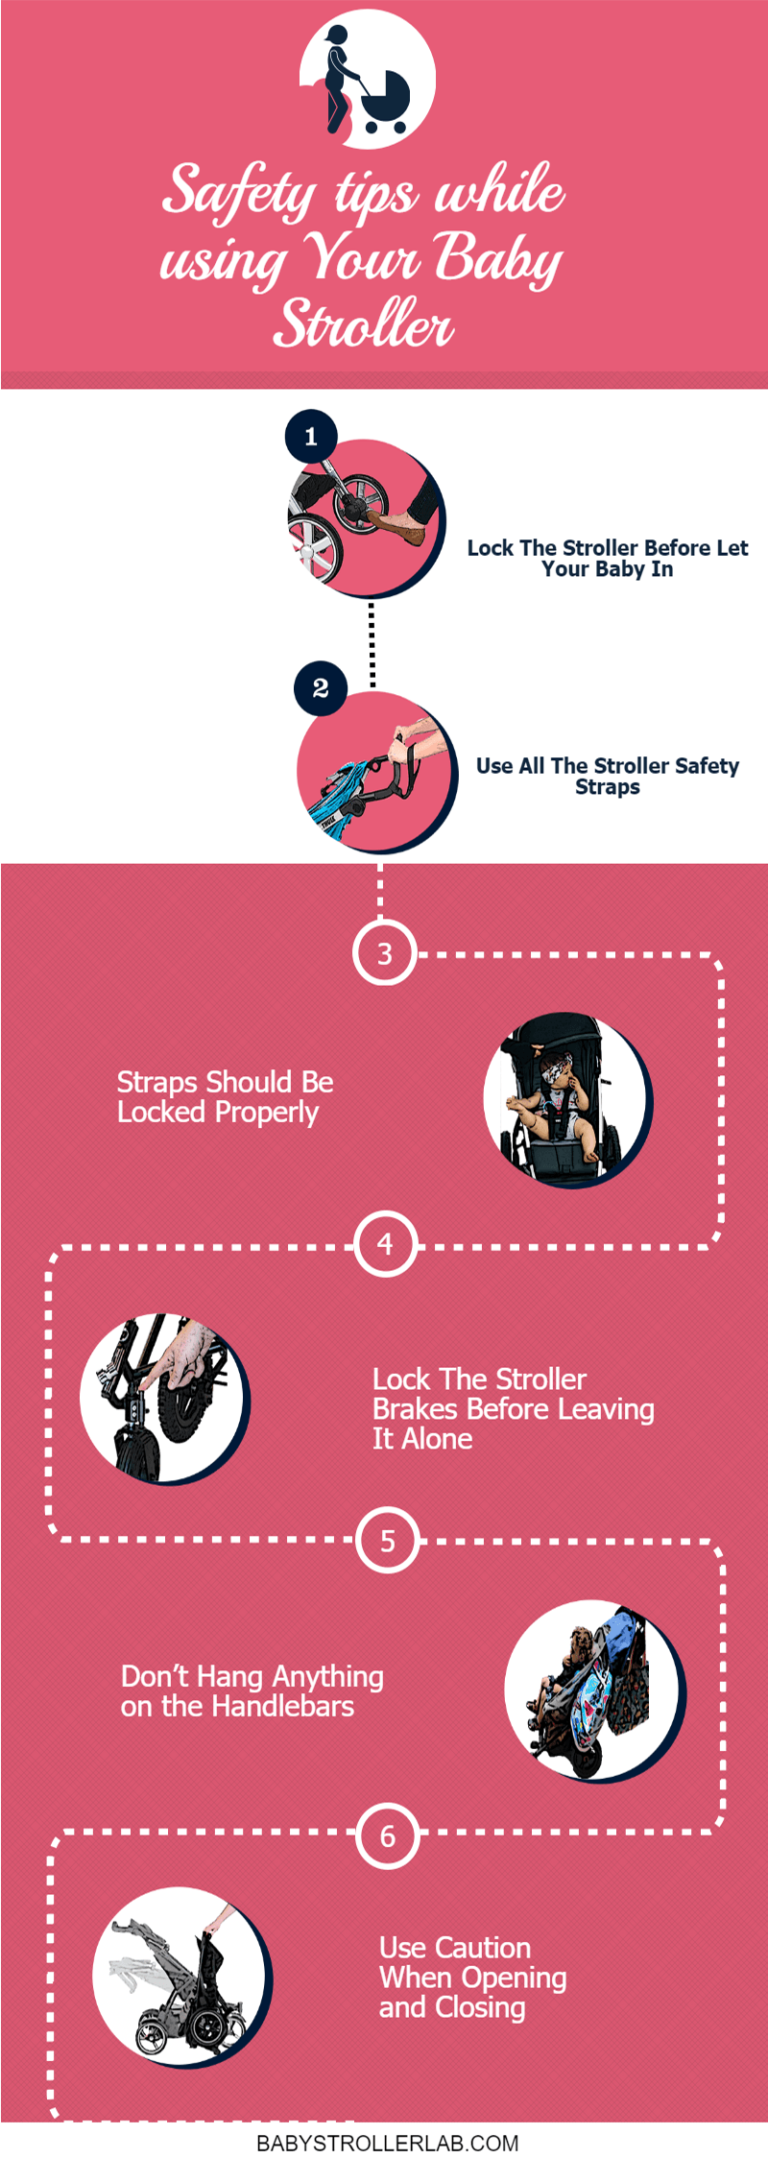 Infographic: Safety Tips While Using Your Baby Stroller